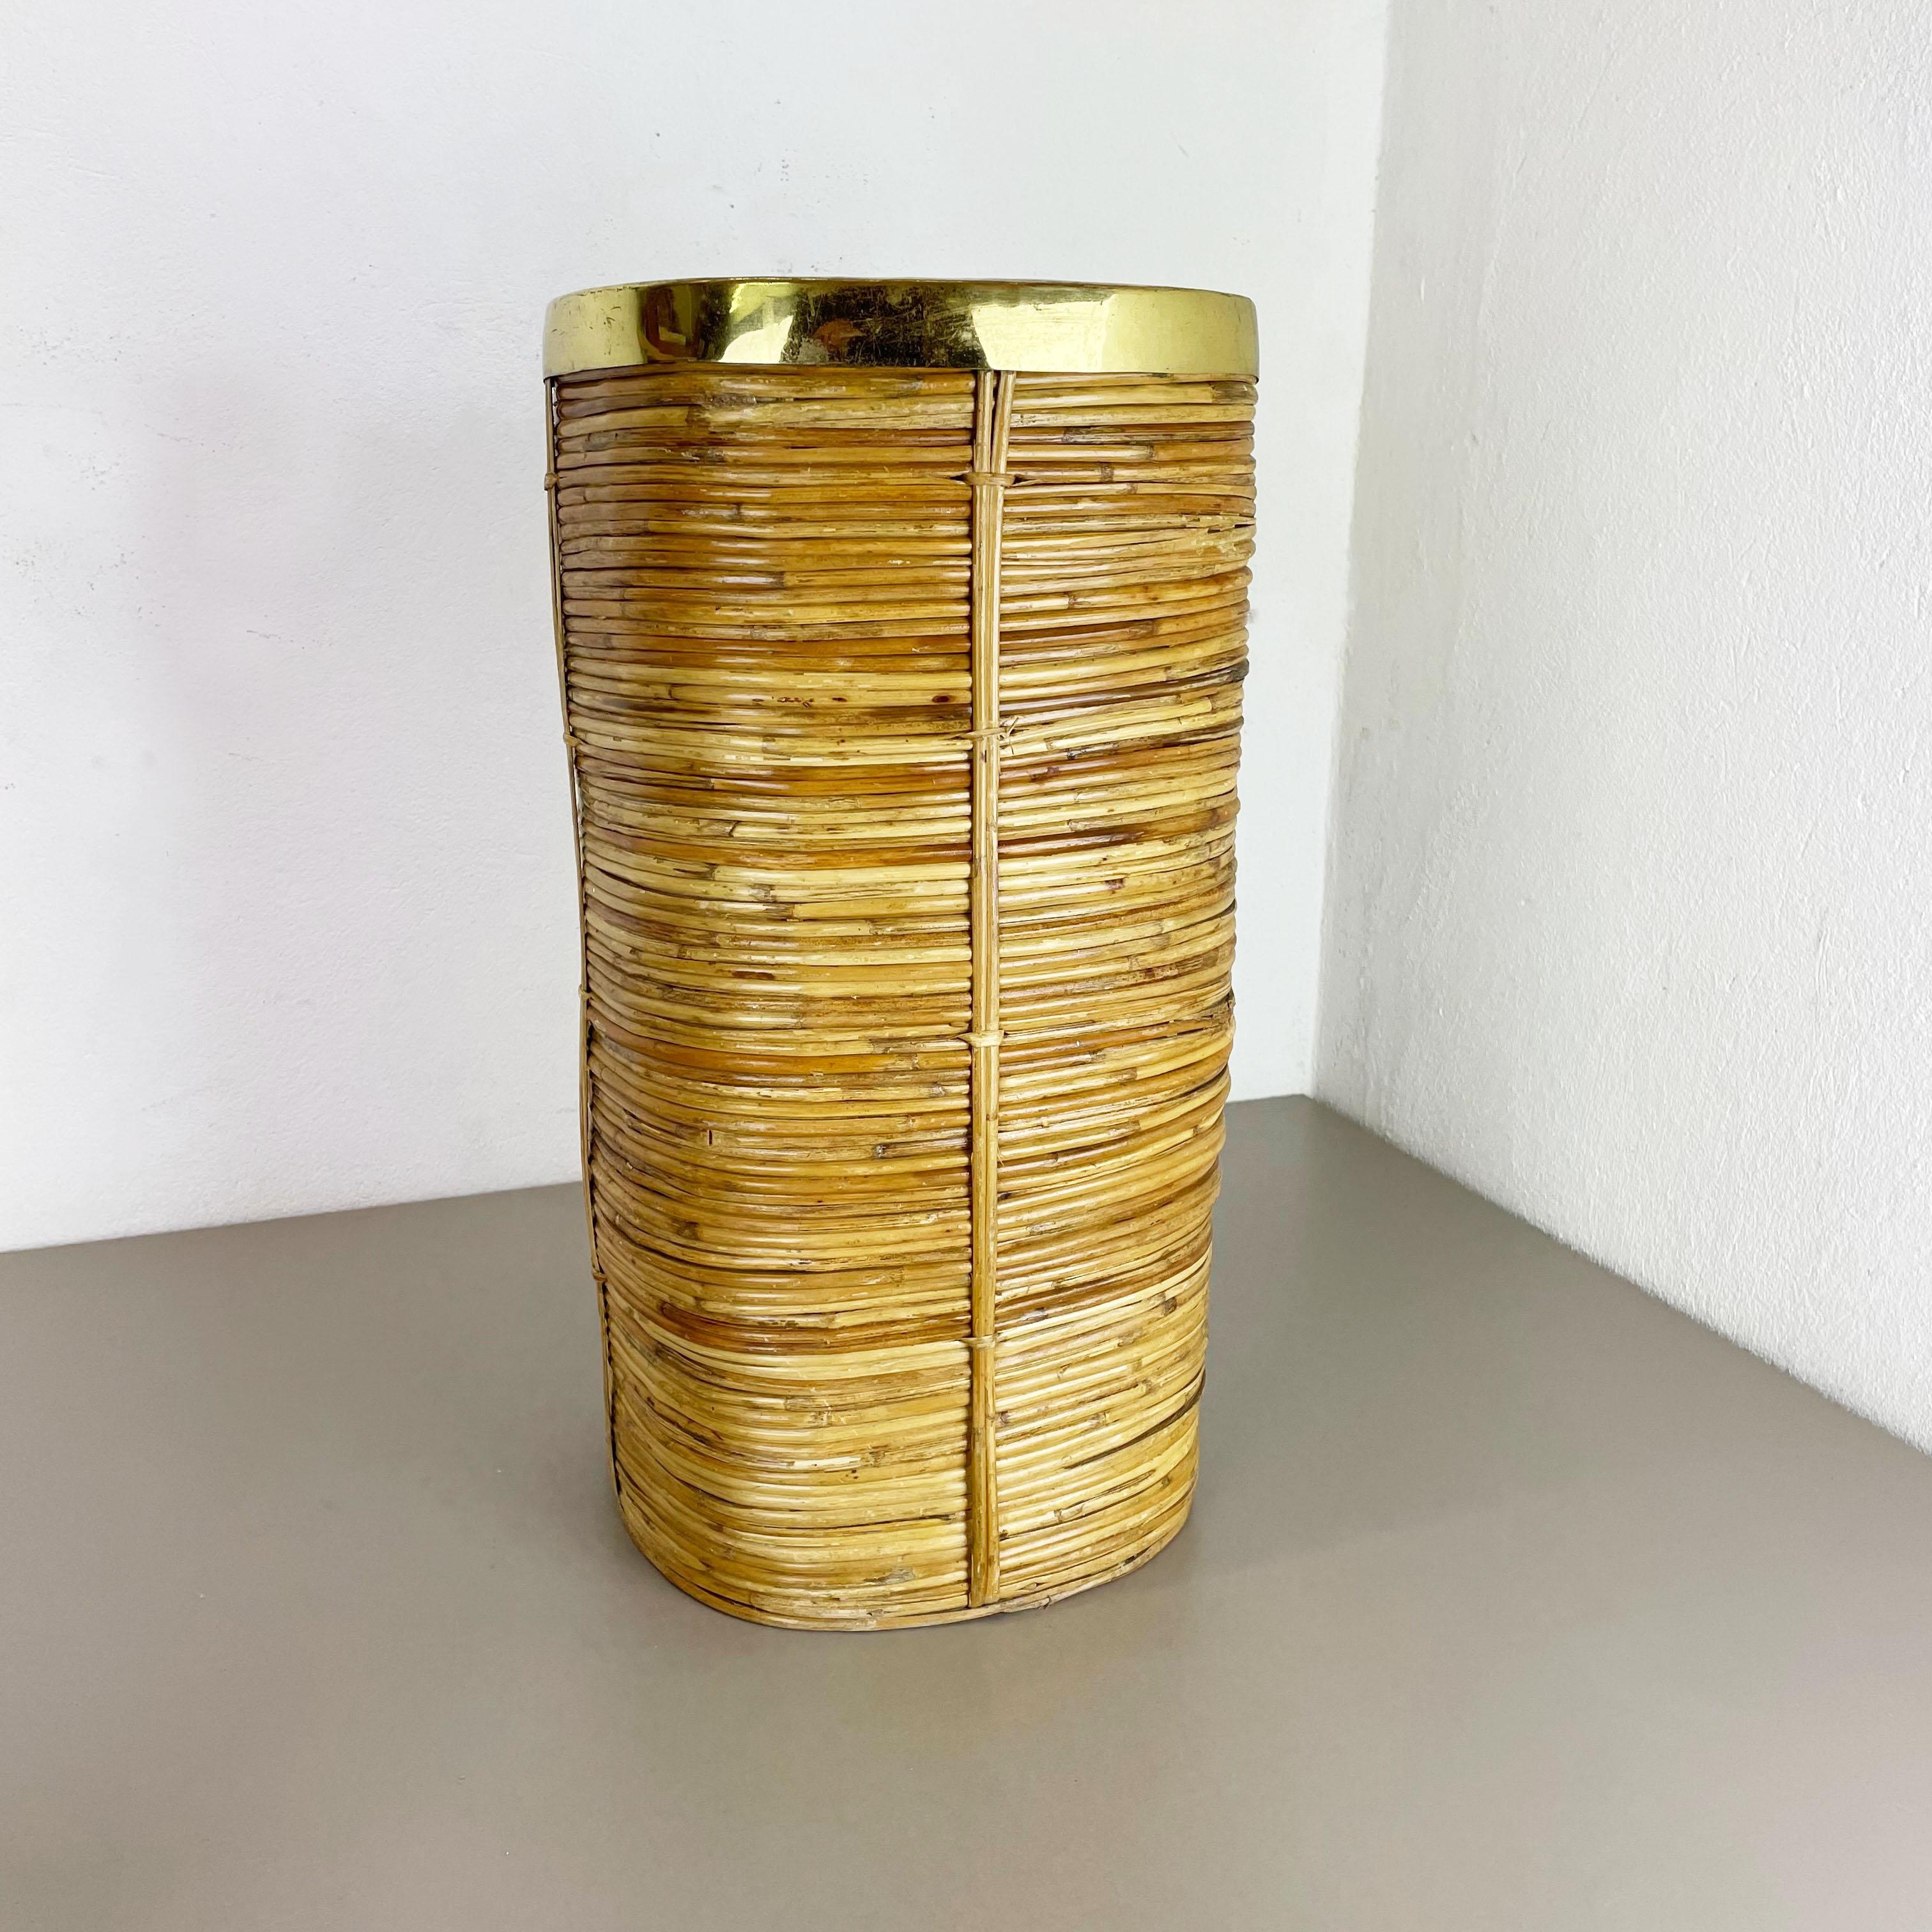 French Aubock Style Mid-Century Rattan and Brass Bauhaus Waste Paper Bin, France, 1960s For Sale